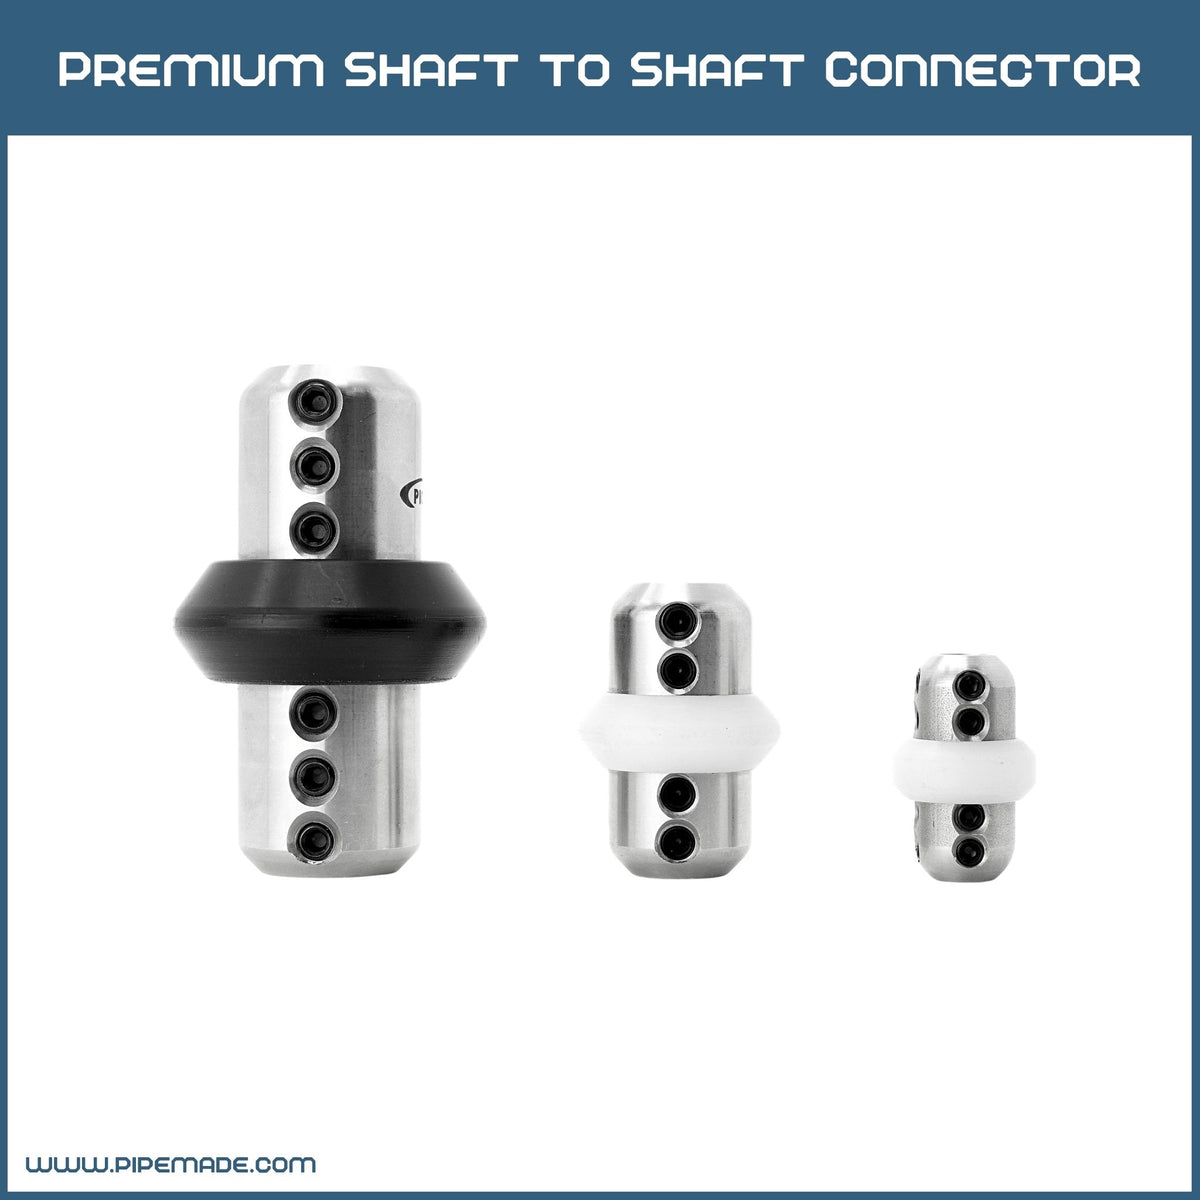 Premium Shaft to Shaft Connector | Shaft, Sleeves & Shaft Connectors | Picote Solutions | picote-shaft-connector